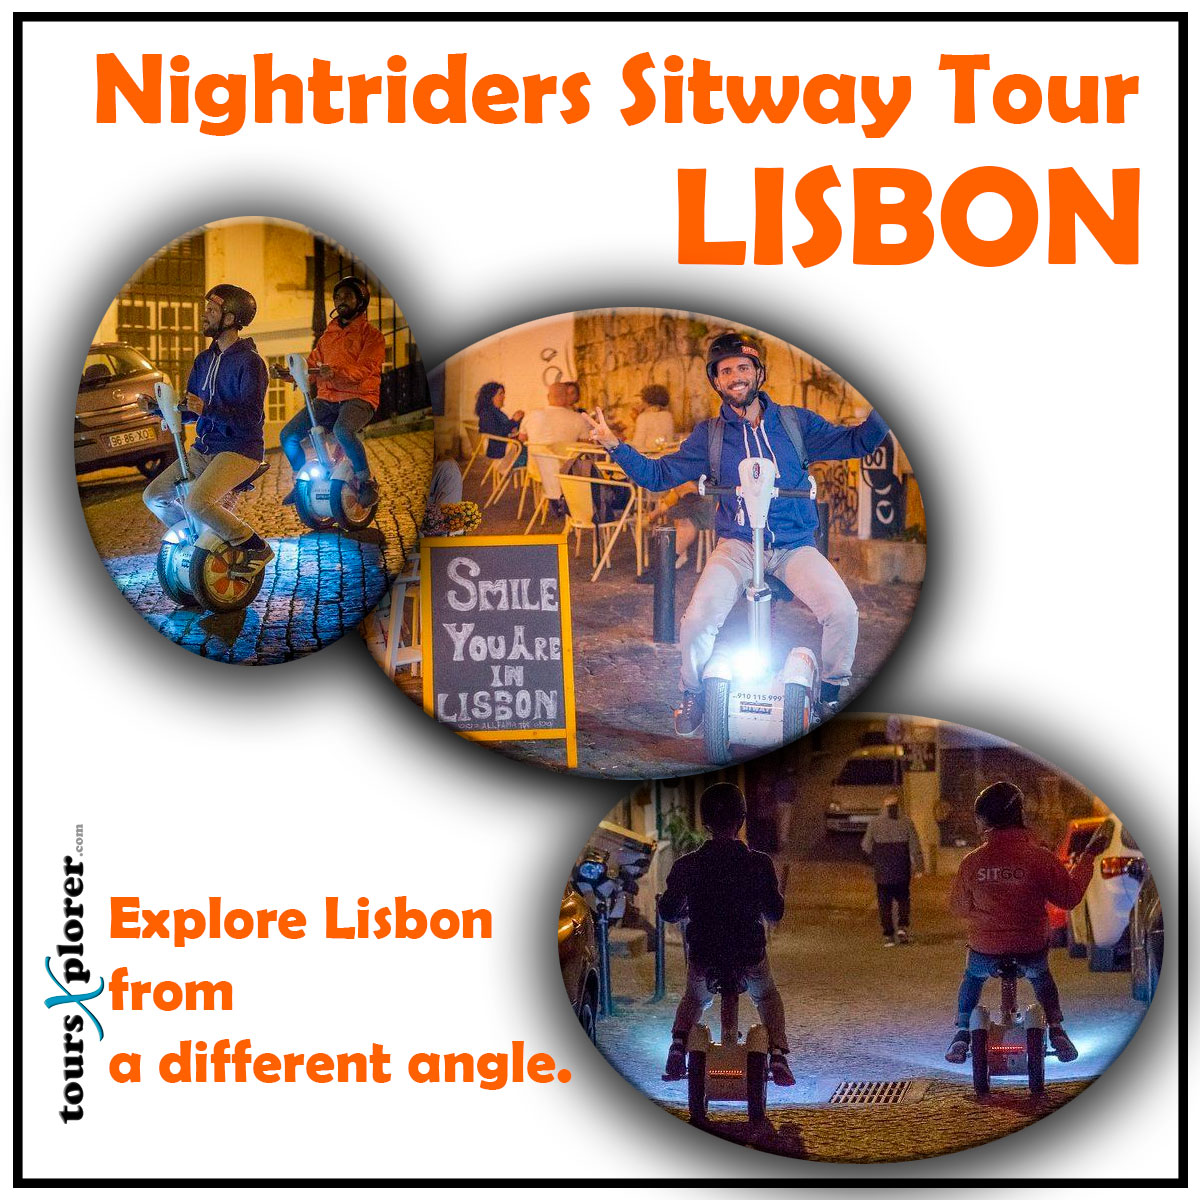 Nightriders Sitway Tour – Don’t be afraid of the dark and explore Lisbon on an exclusive Nightriders Sitway Tour
#LisbonByNight #FunAtNight #ExploreLisbon #Tourism #TravelLisbon #TravelPortugal #DiscoverLisbon #VisitLisbon #TravelPhotography #ToursXplorer

toursxplorer.com/tour/nightride…